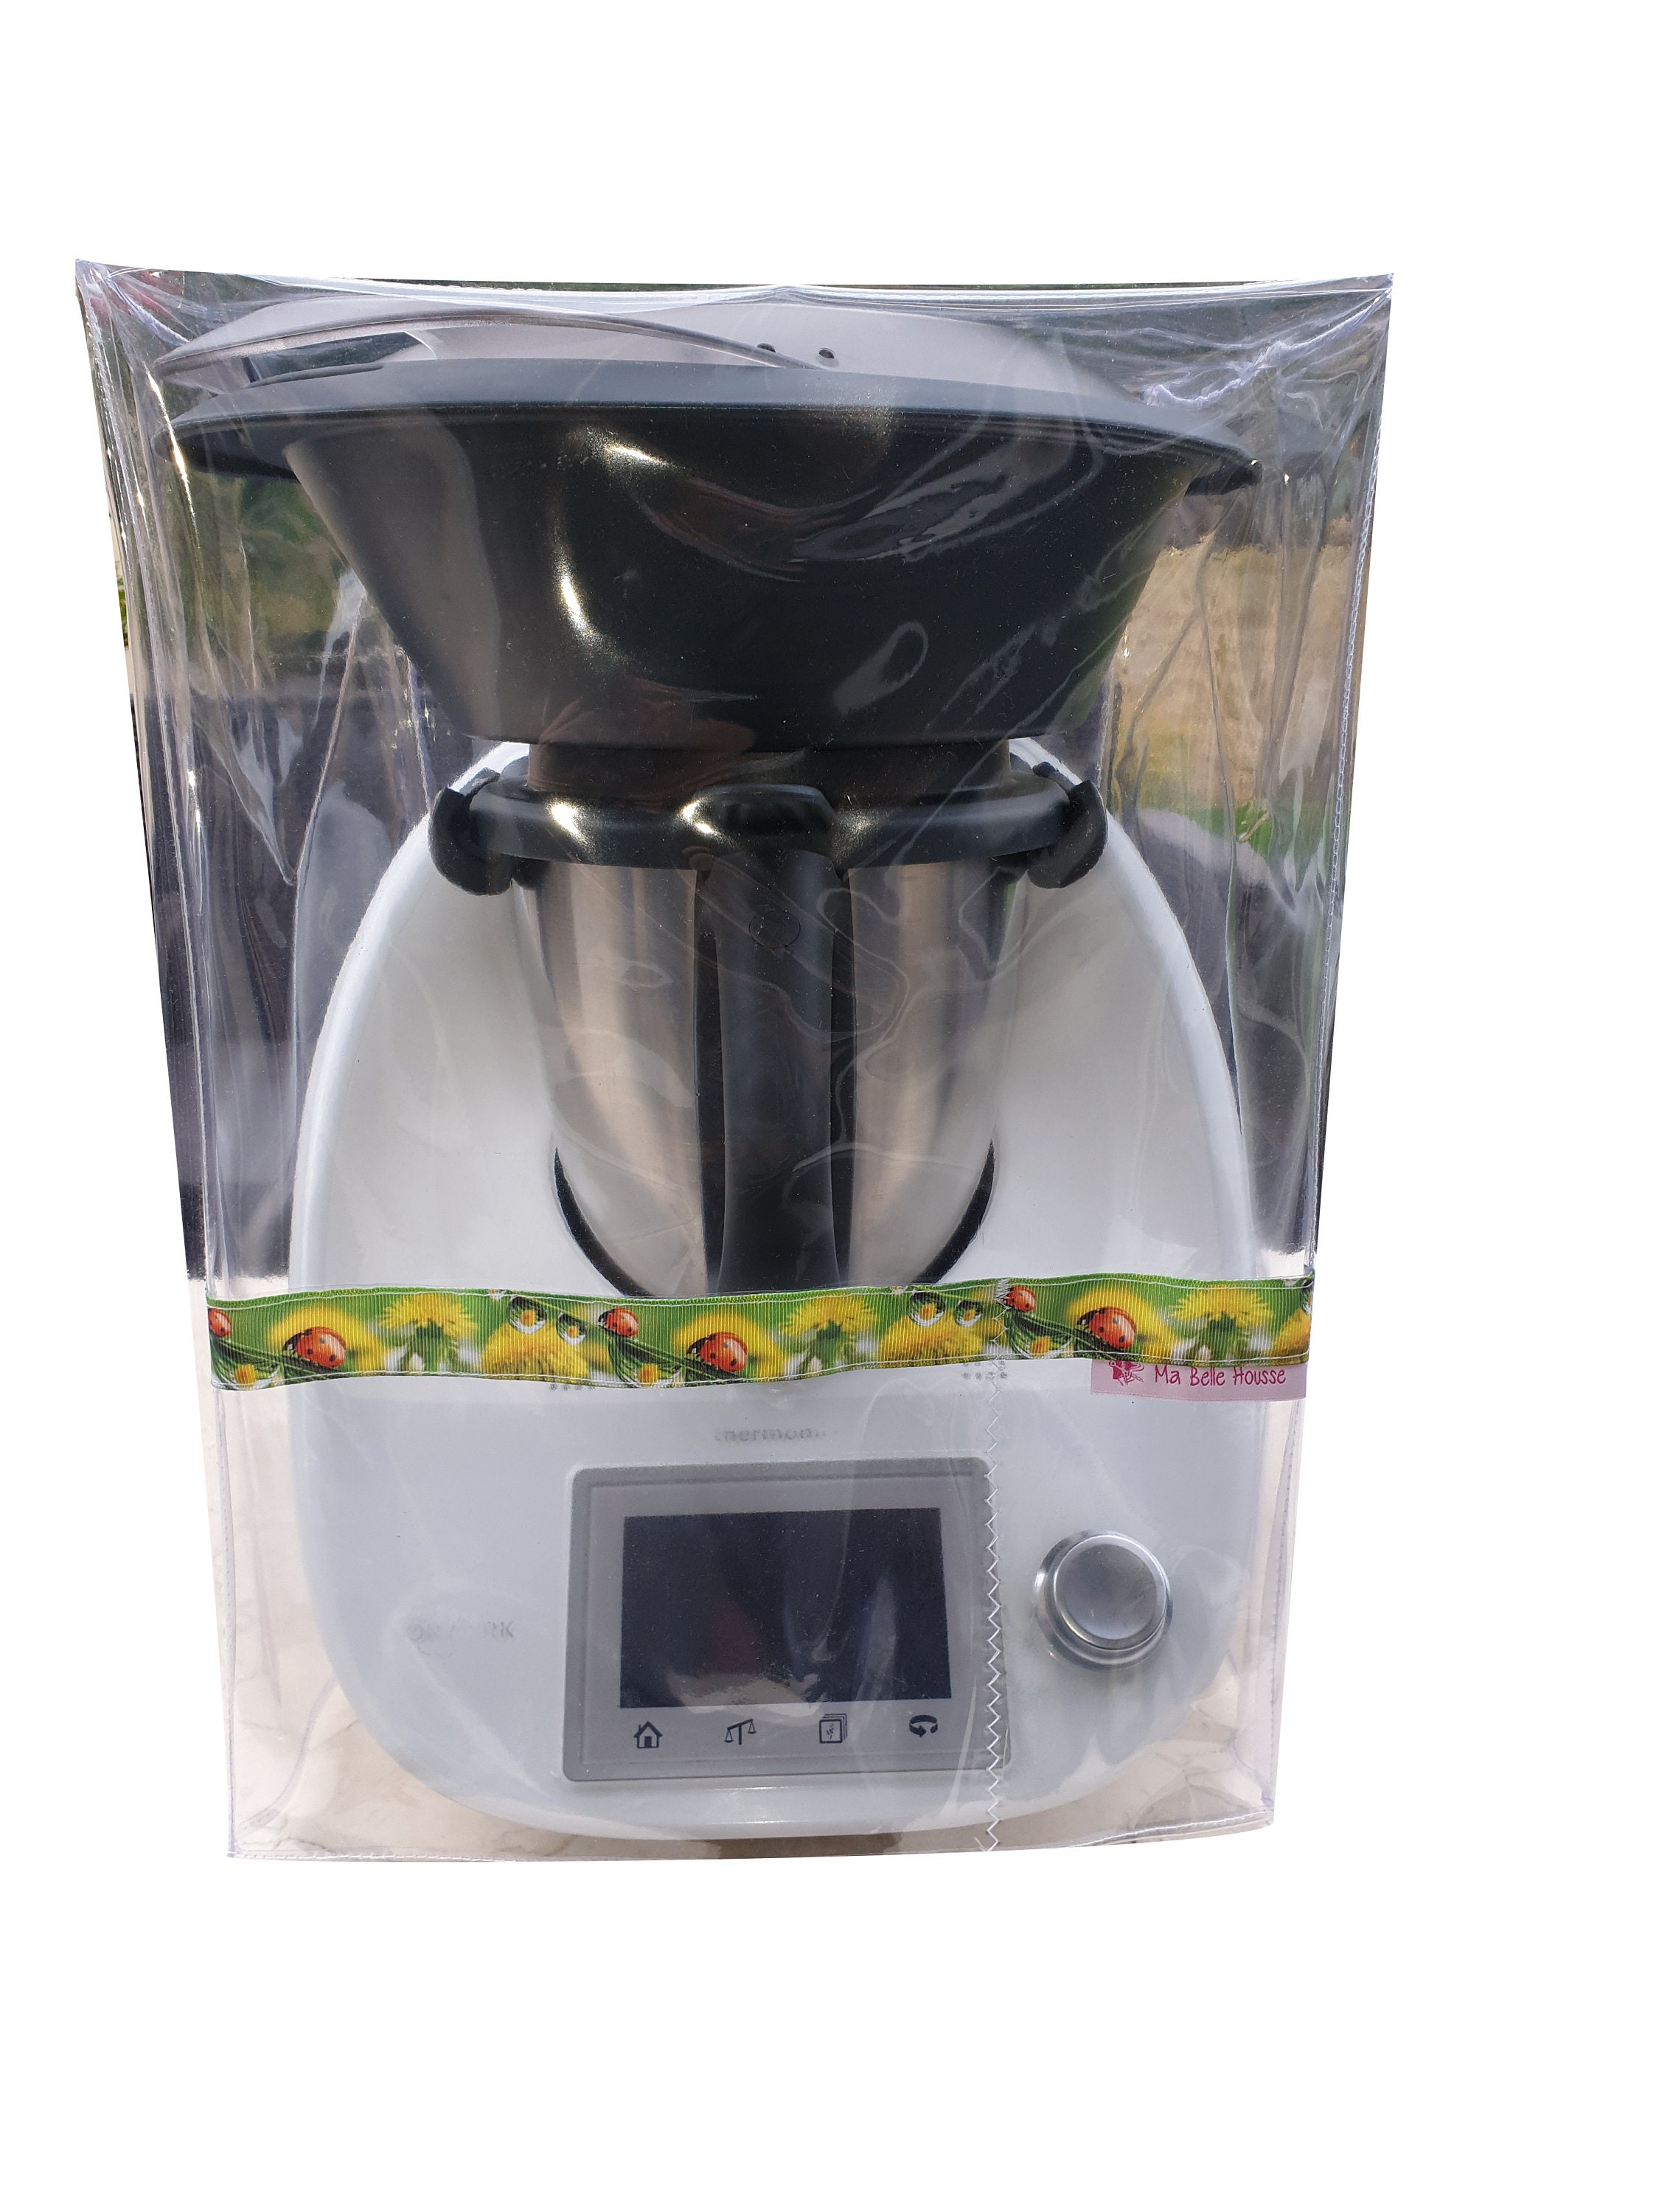 Pescador Plaga Rápido PROTECTIVE COVER for THERMOMIX With Varoma Beetle - Etsy